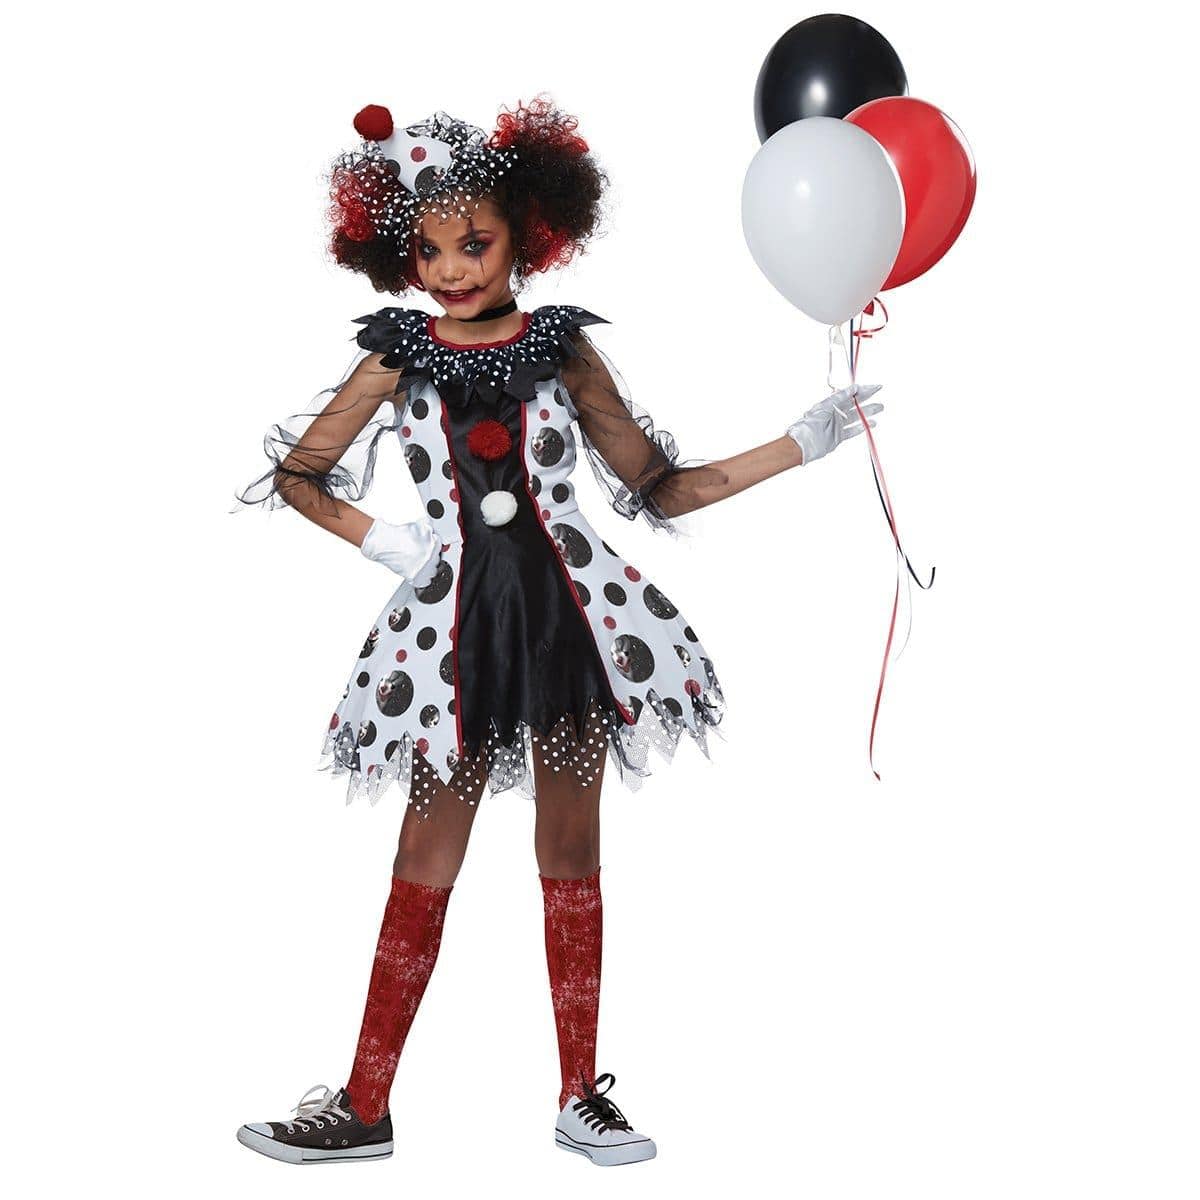 Buy Costumes Creepy Clown Costume for Kids sold at Party Expert